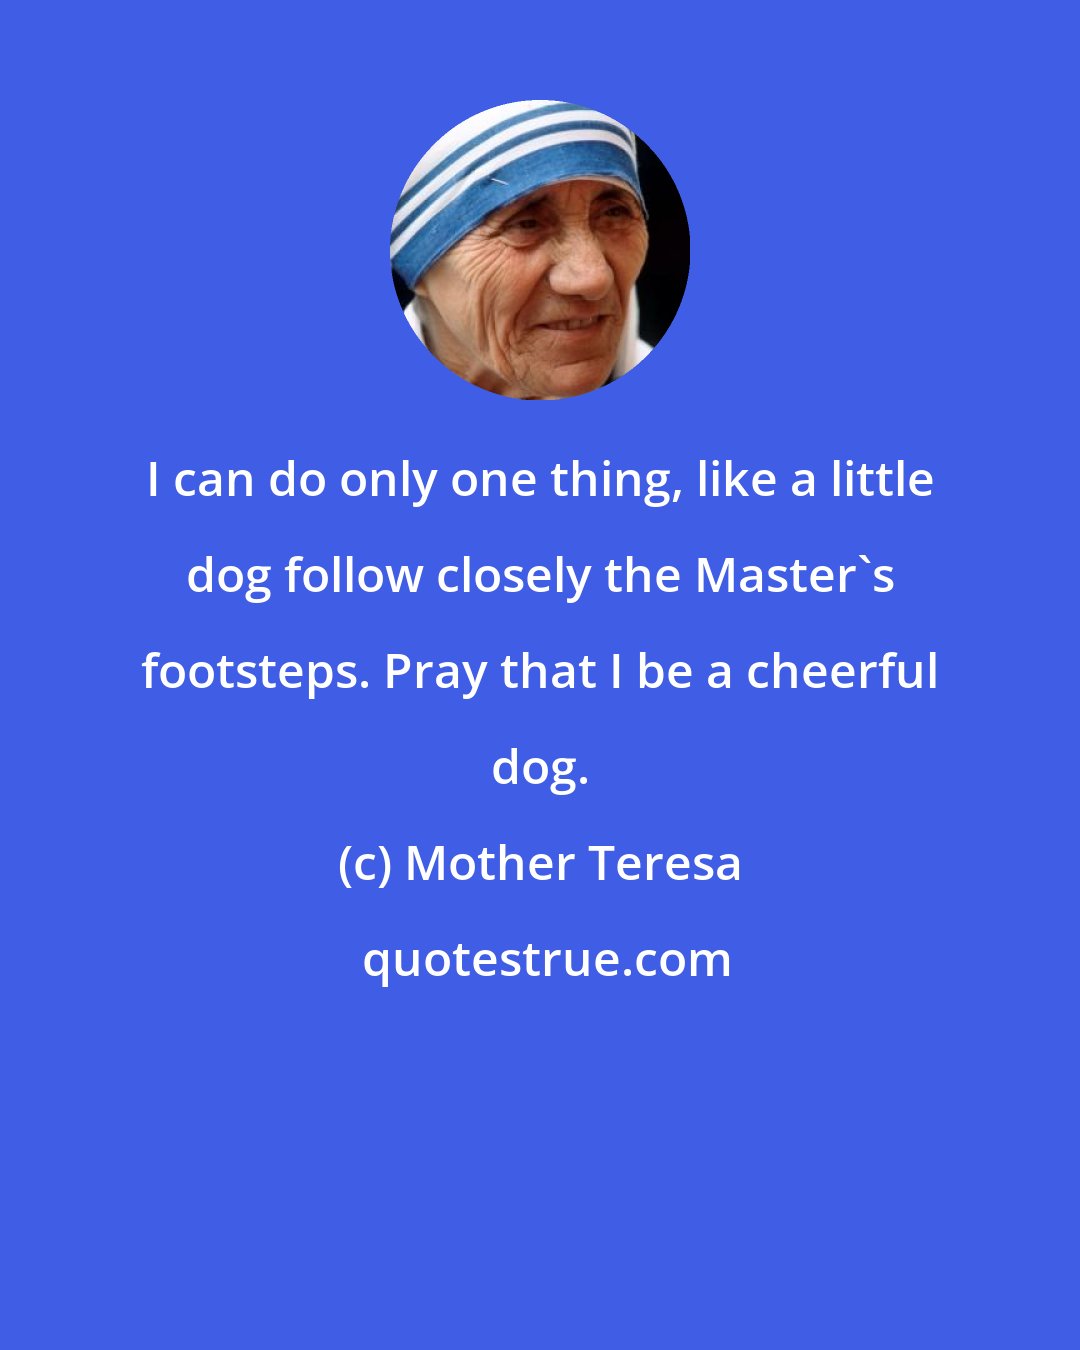 Mother Teresa: I can do only one thing, like a little dog follow closely the Master's footsteps. Pray that I be a cheerful dog.